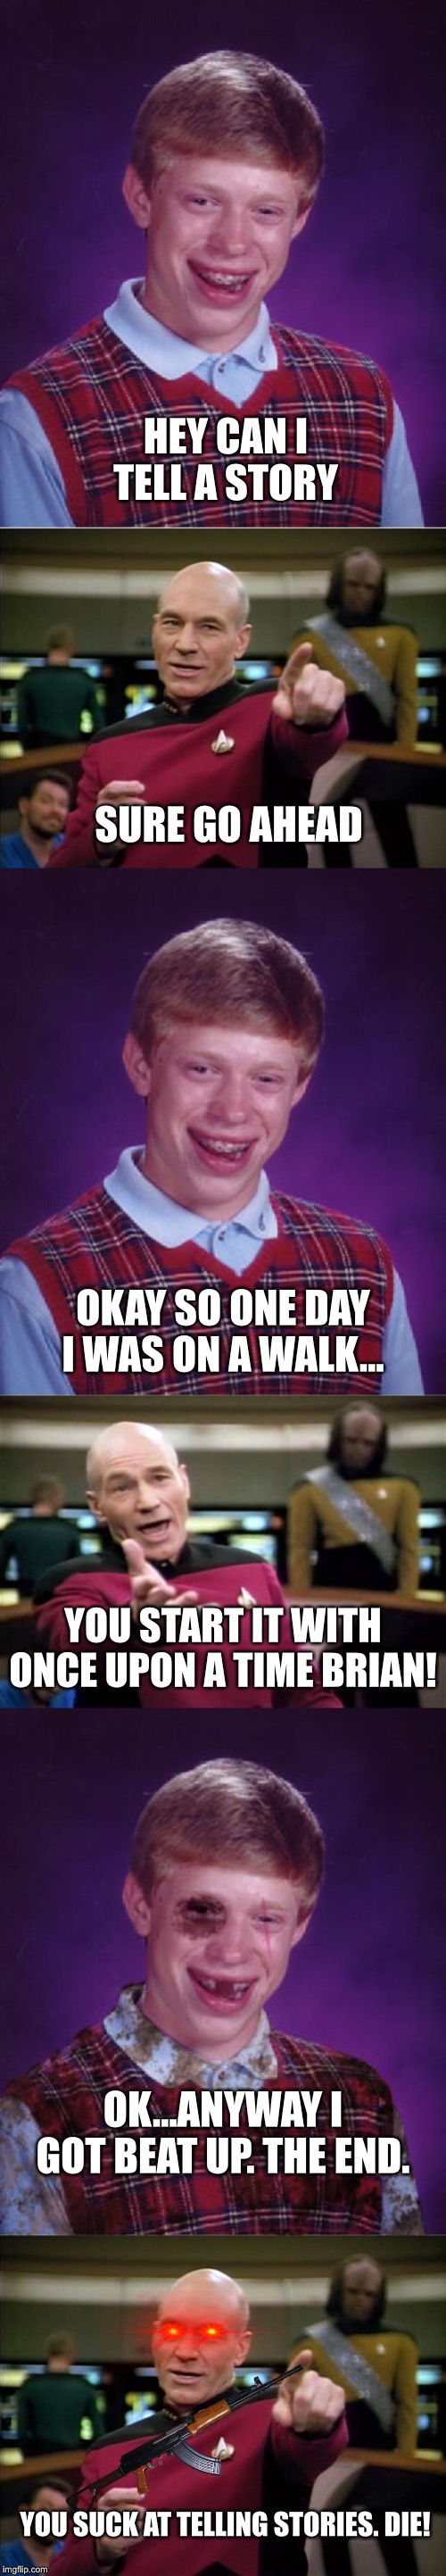 HEY CAN I TELL A STORY; SURE GO AHEAD; OKAY SO ONE DAY I WAS ON A WALK... YOU START IT WITH ONCE UPON A TIME BRIAN! OK...ANYWAY I GOT BEAT UP. THE END. YOU SUCK AT TELLING STORIES. DIE! | image tagged in memes,bad luck brian,picard wtf,picard,beat-up bad luck brian | made w/ Imgflip meme maker